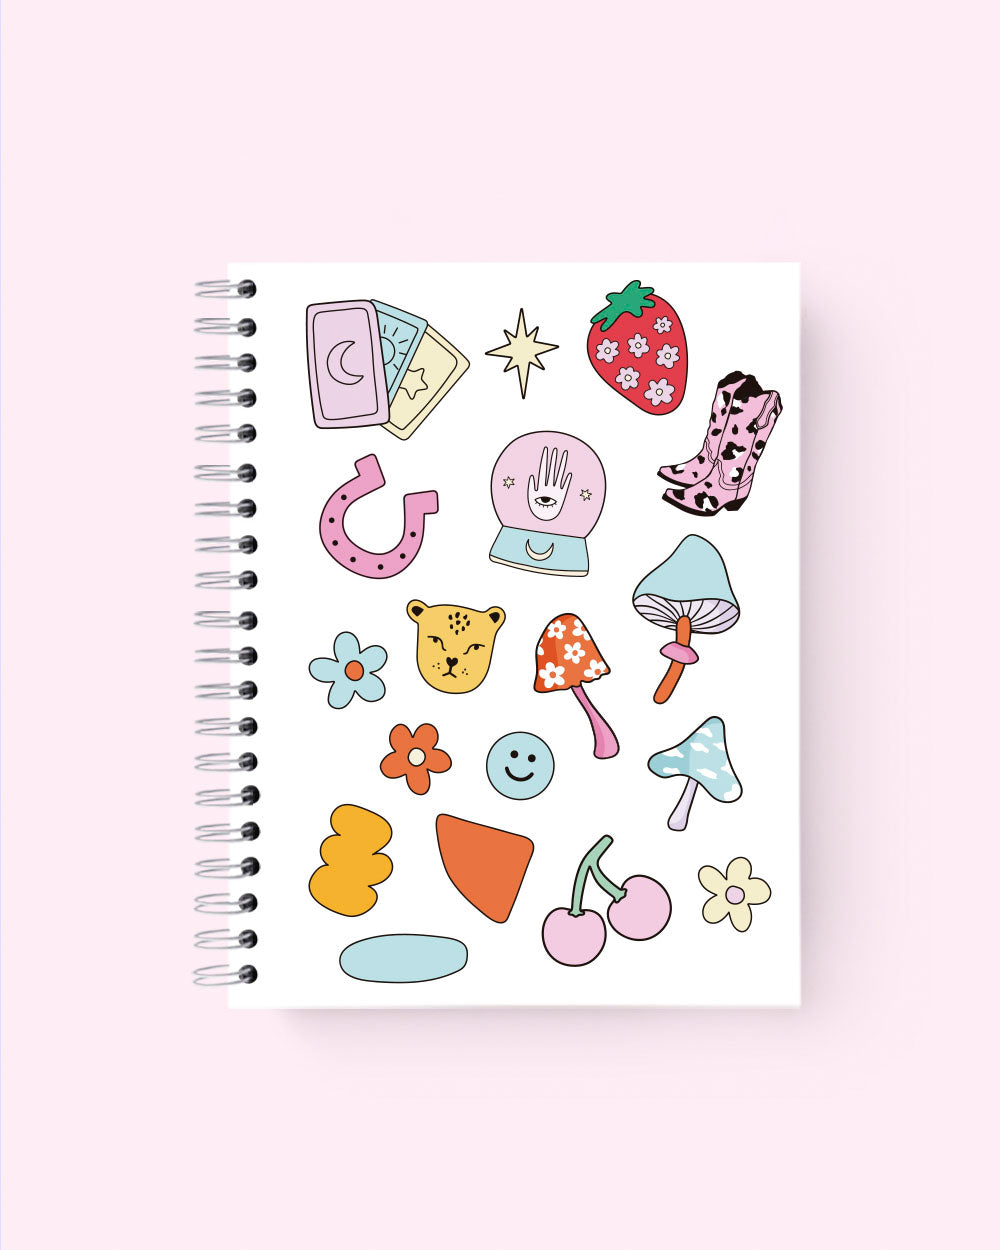 NOTEBOOK FUNGHI WORLD